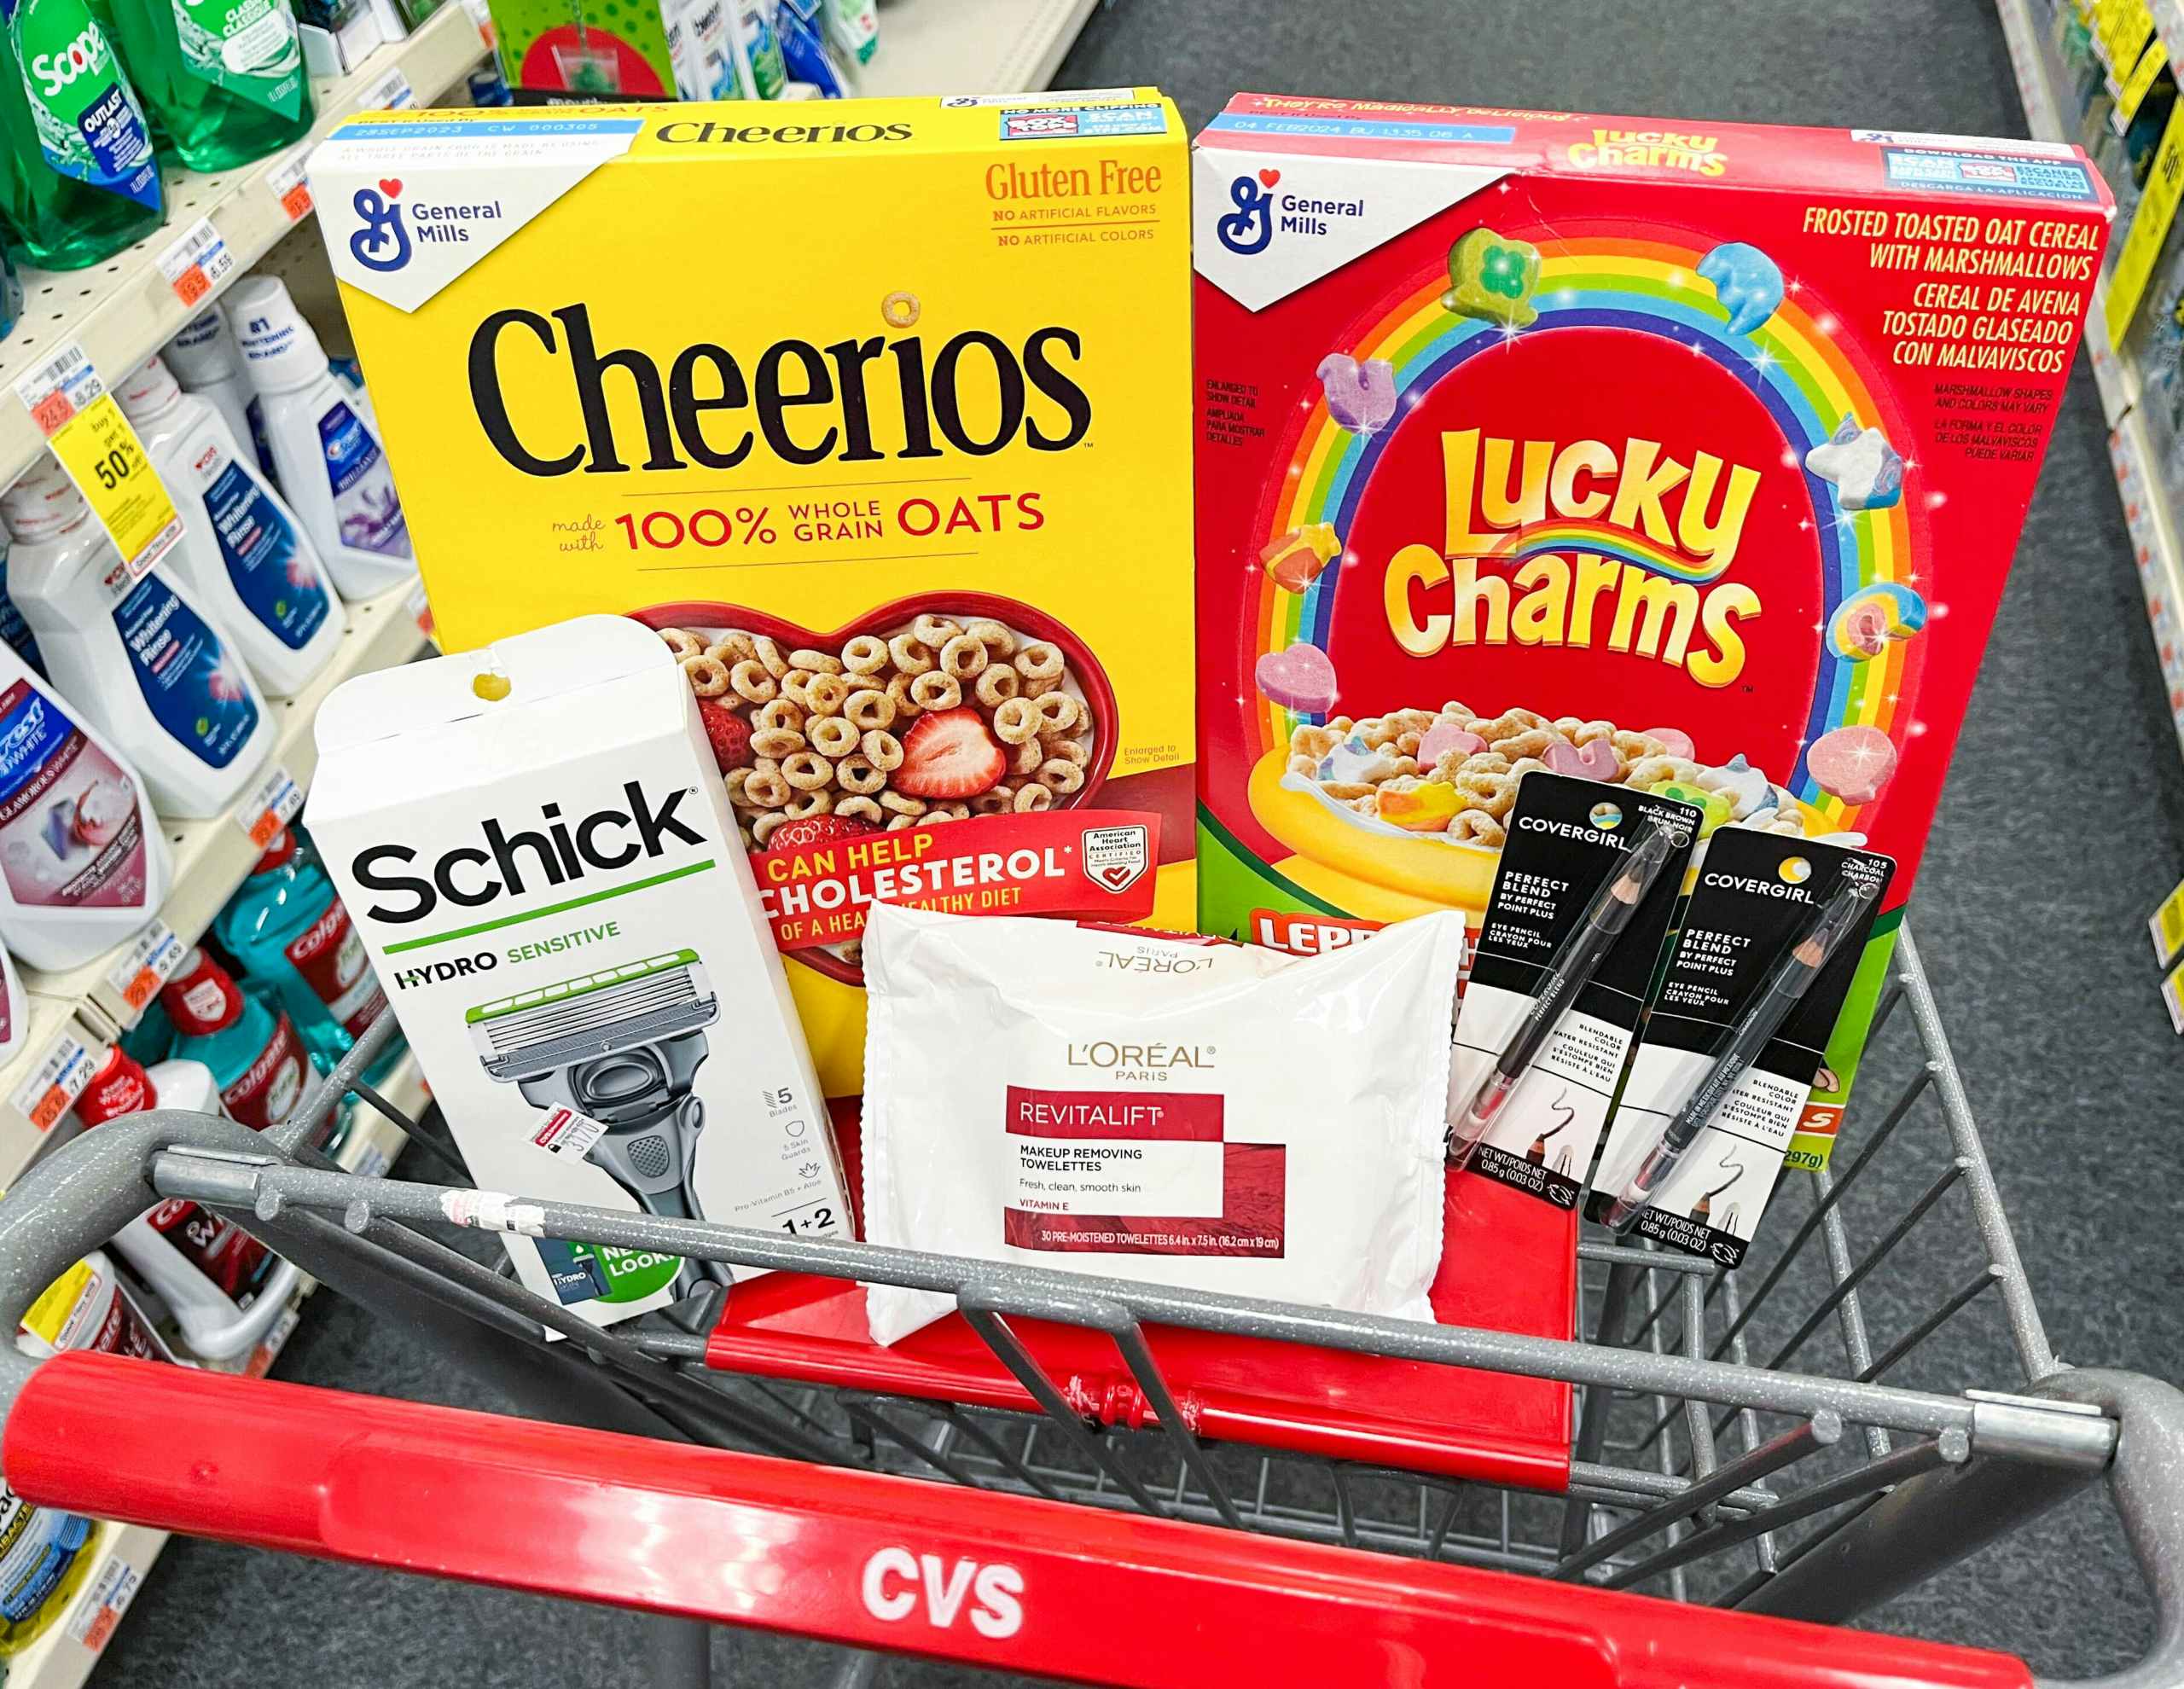 shopping cart with Cheerios cereal, Lucky Charms cereal, Schick razor, L'Oreal Paris Revitalift makeup remover wipes, and two Covergirl eyeliners inside